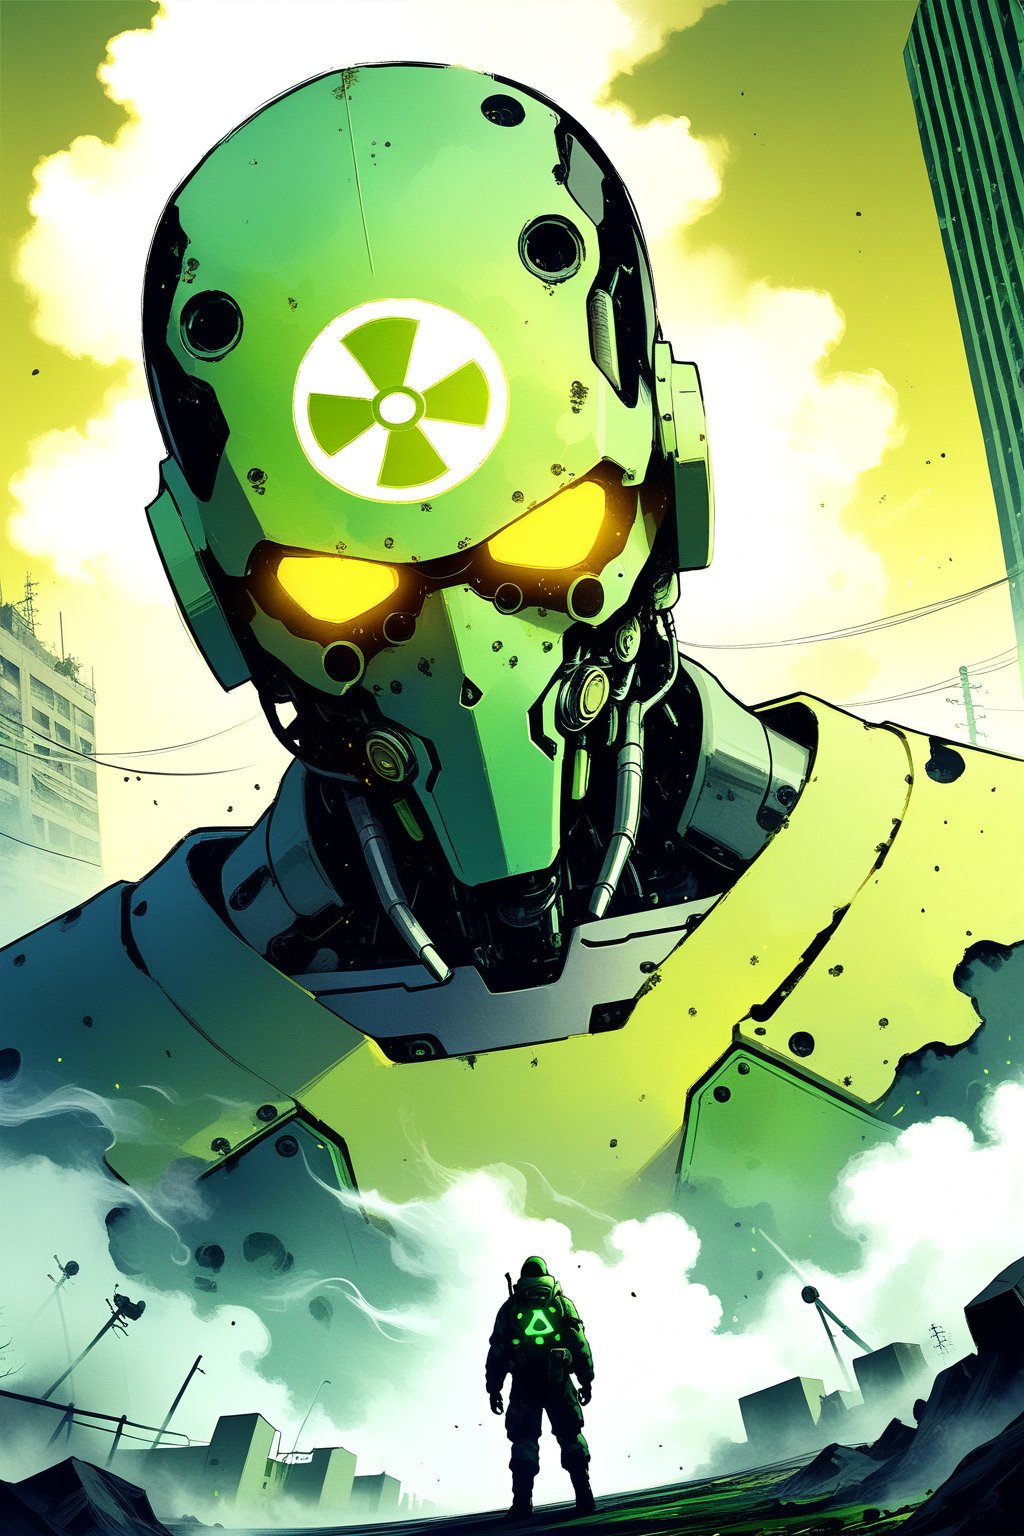 DonMW15pXL, cyborg style, soldier with anti-radiation suit facing giant biological terror, city, toxic smoke, radiation symbol, toxic environment symbols, radiation, masterpiece, wallpaper